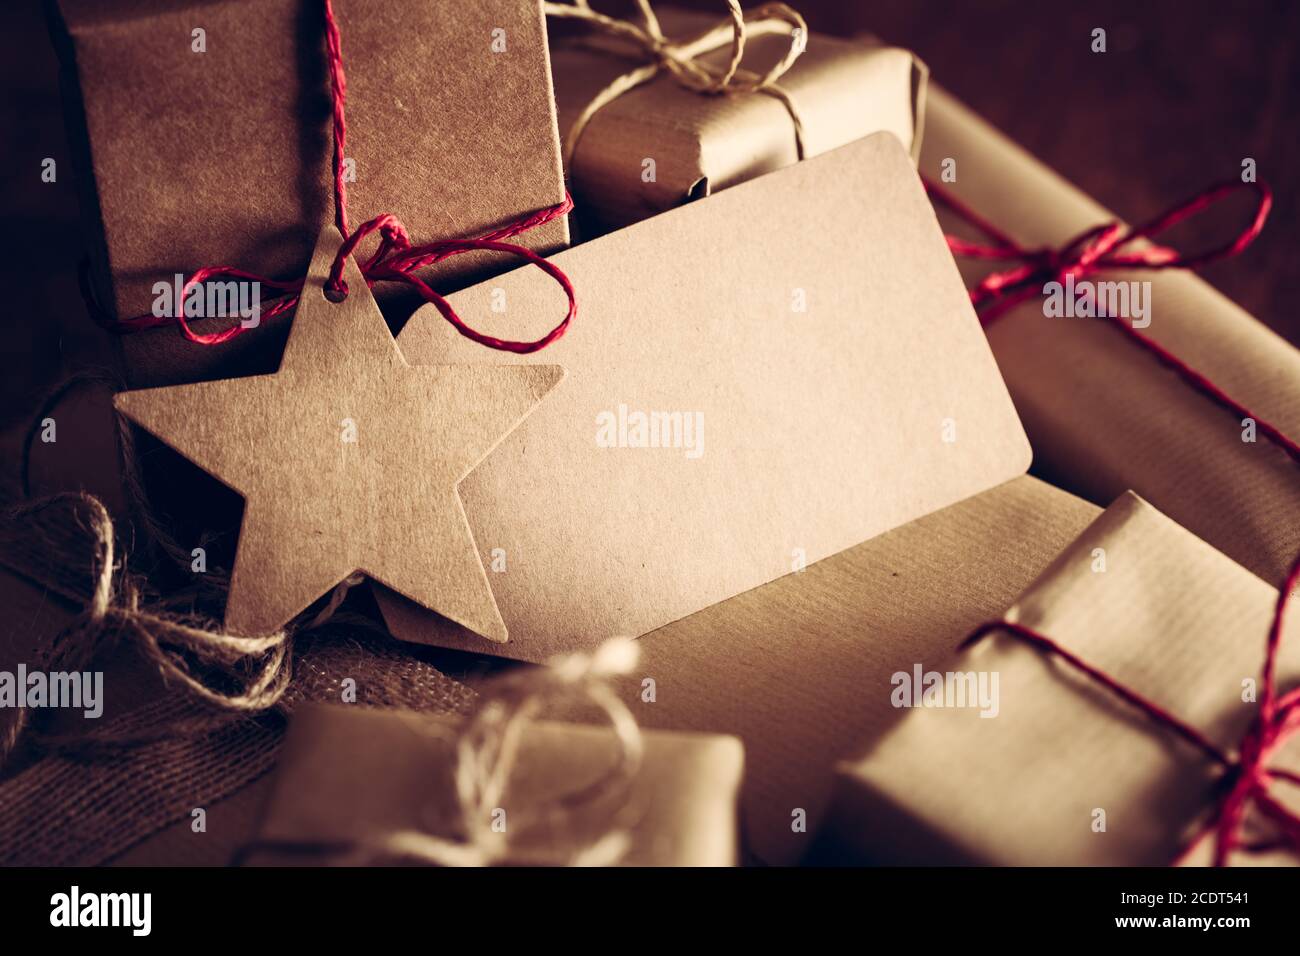 Rustic retro gift, present boxes with tag. Christmas time, eco paper wrap. Stock Photo